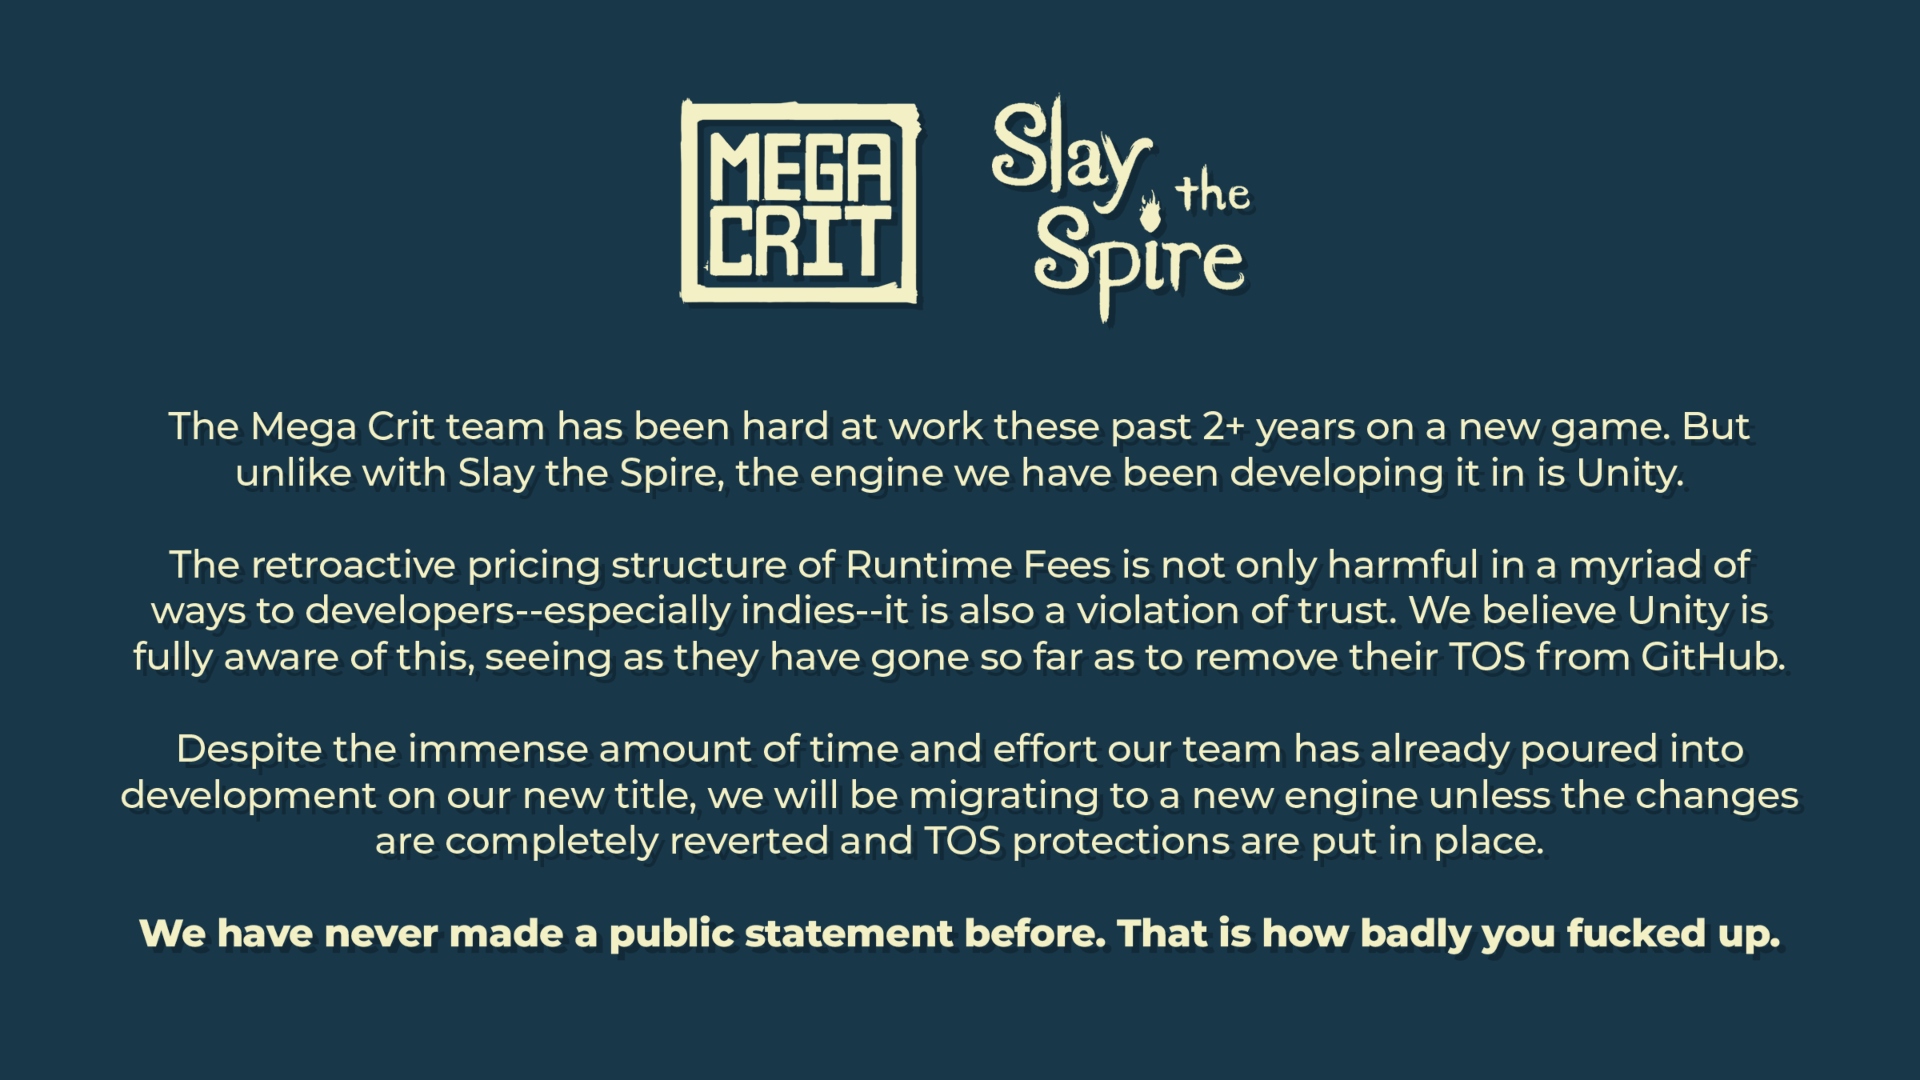 Slay the Spire Unity: A statement from Mega Crit, creator of roguelike deckbuilding game Slay the Spire